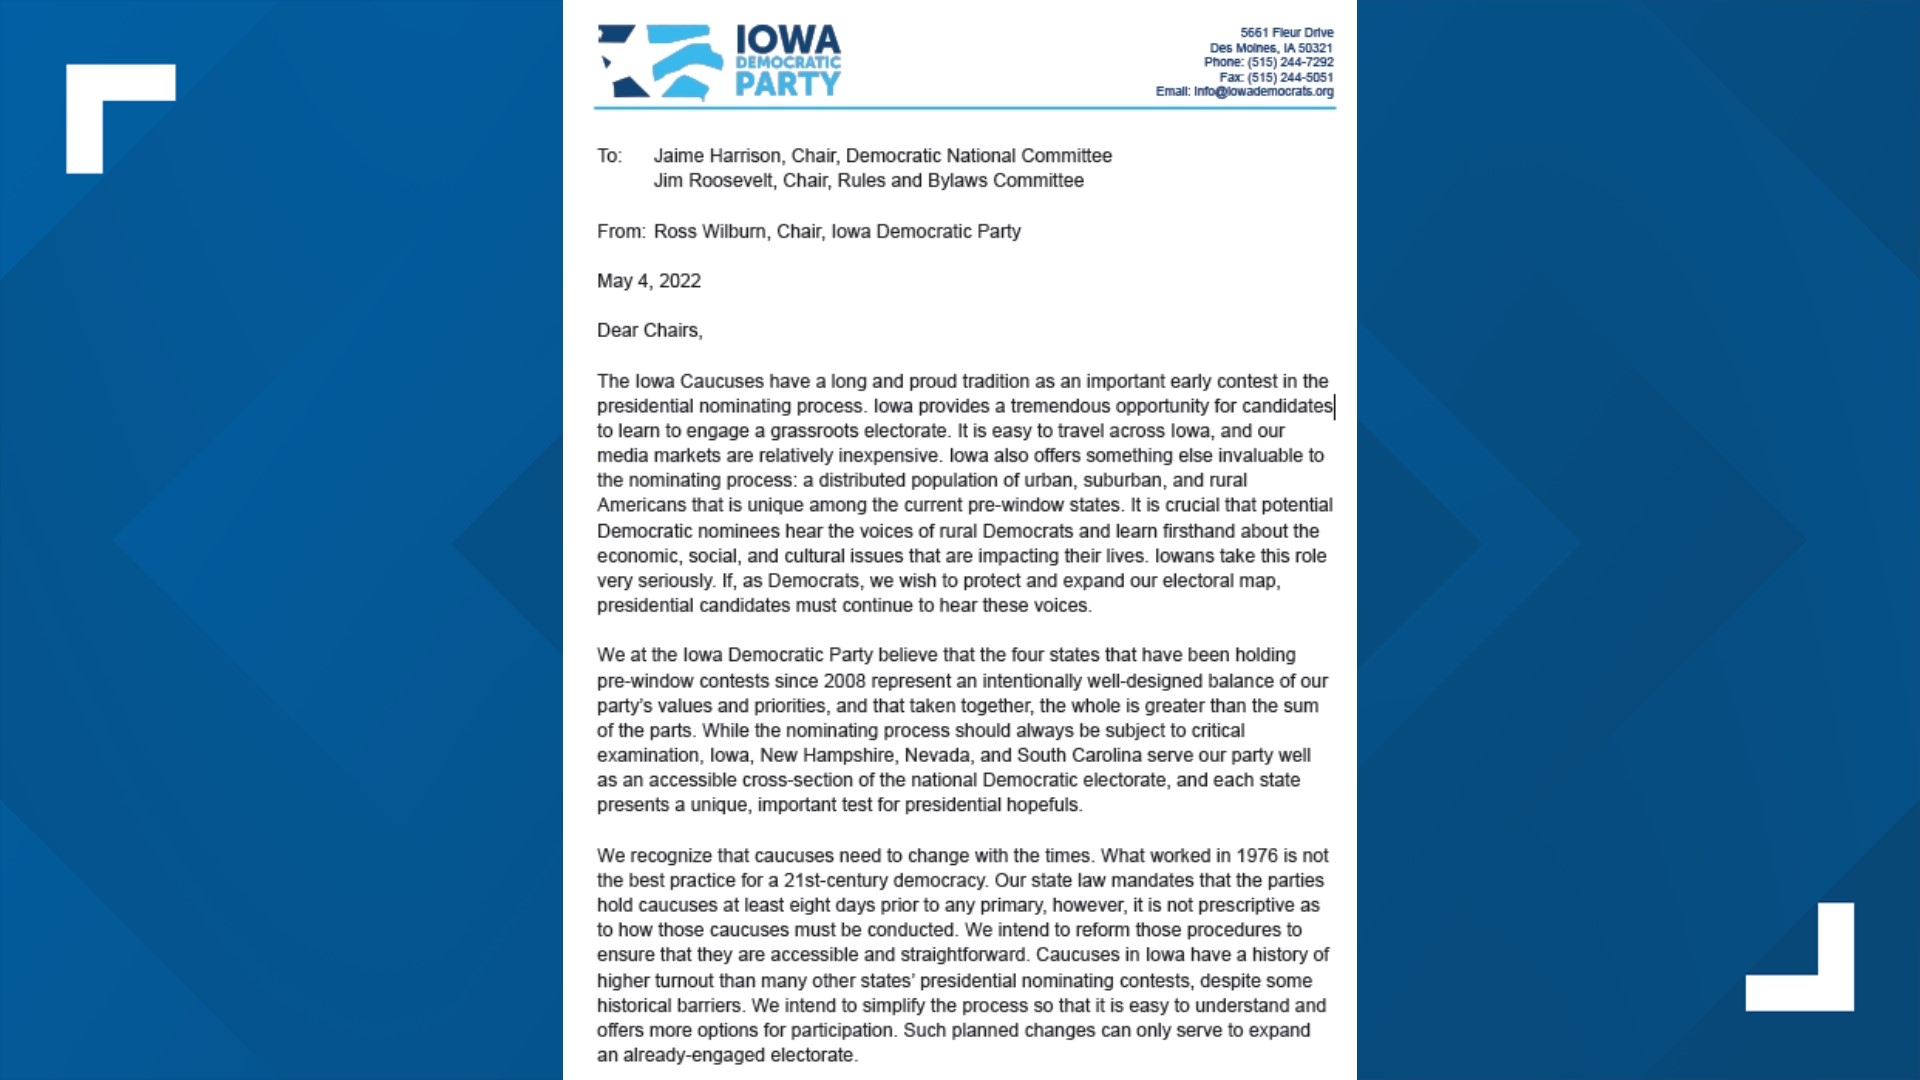 Wednesday's letter begins the formal process of Iowa Democrats' fight to remain first in the nation.